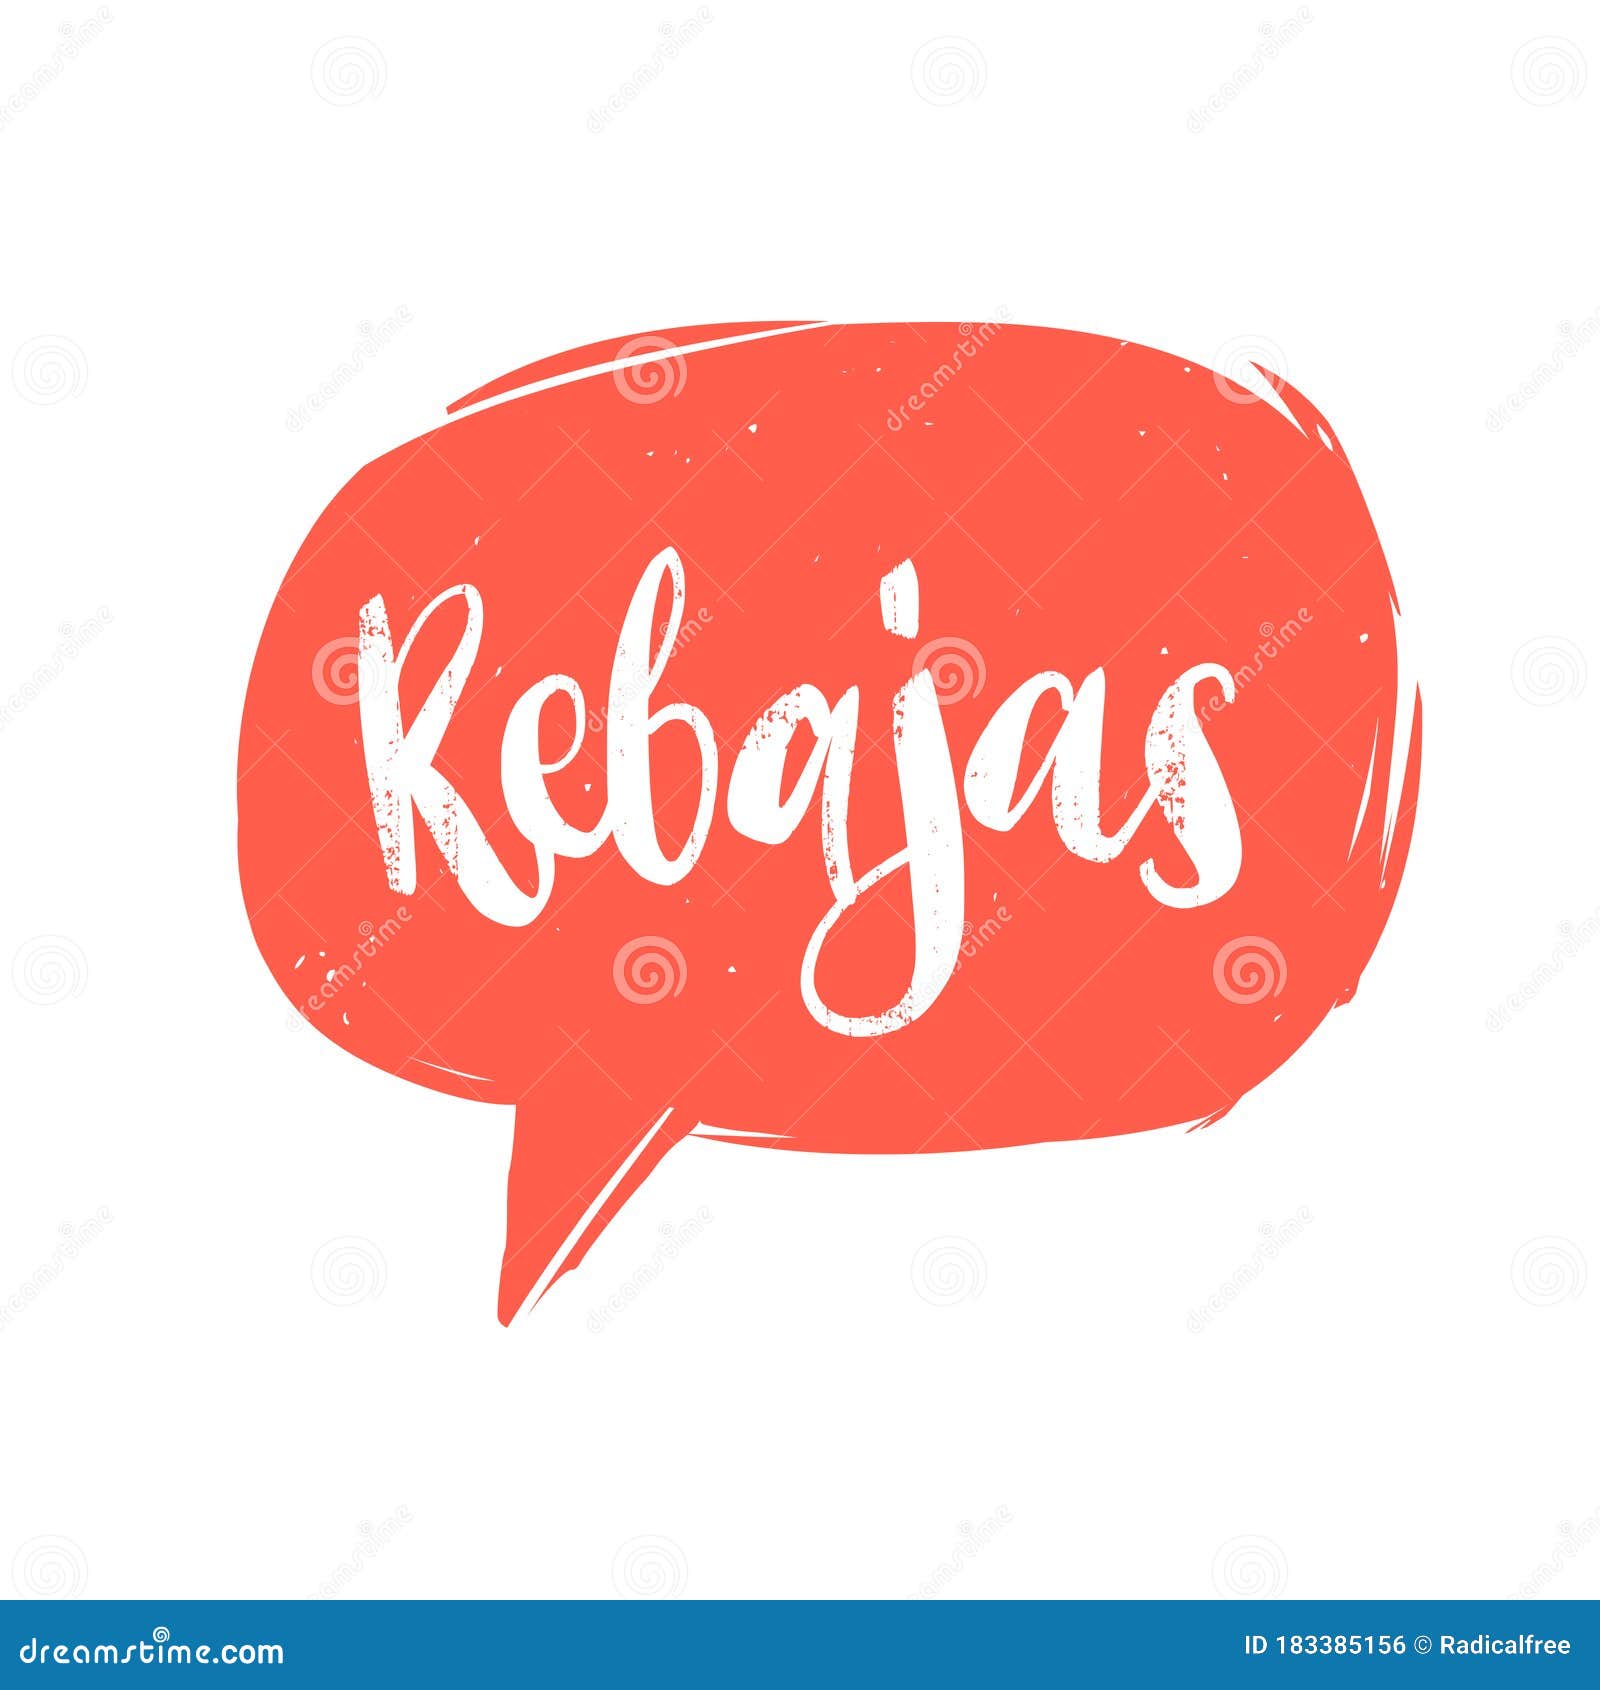 rebajas calligraphy in , spanish translation of sales phrase. hand lettering in speech bubble.